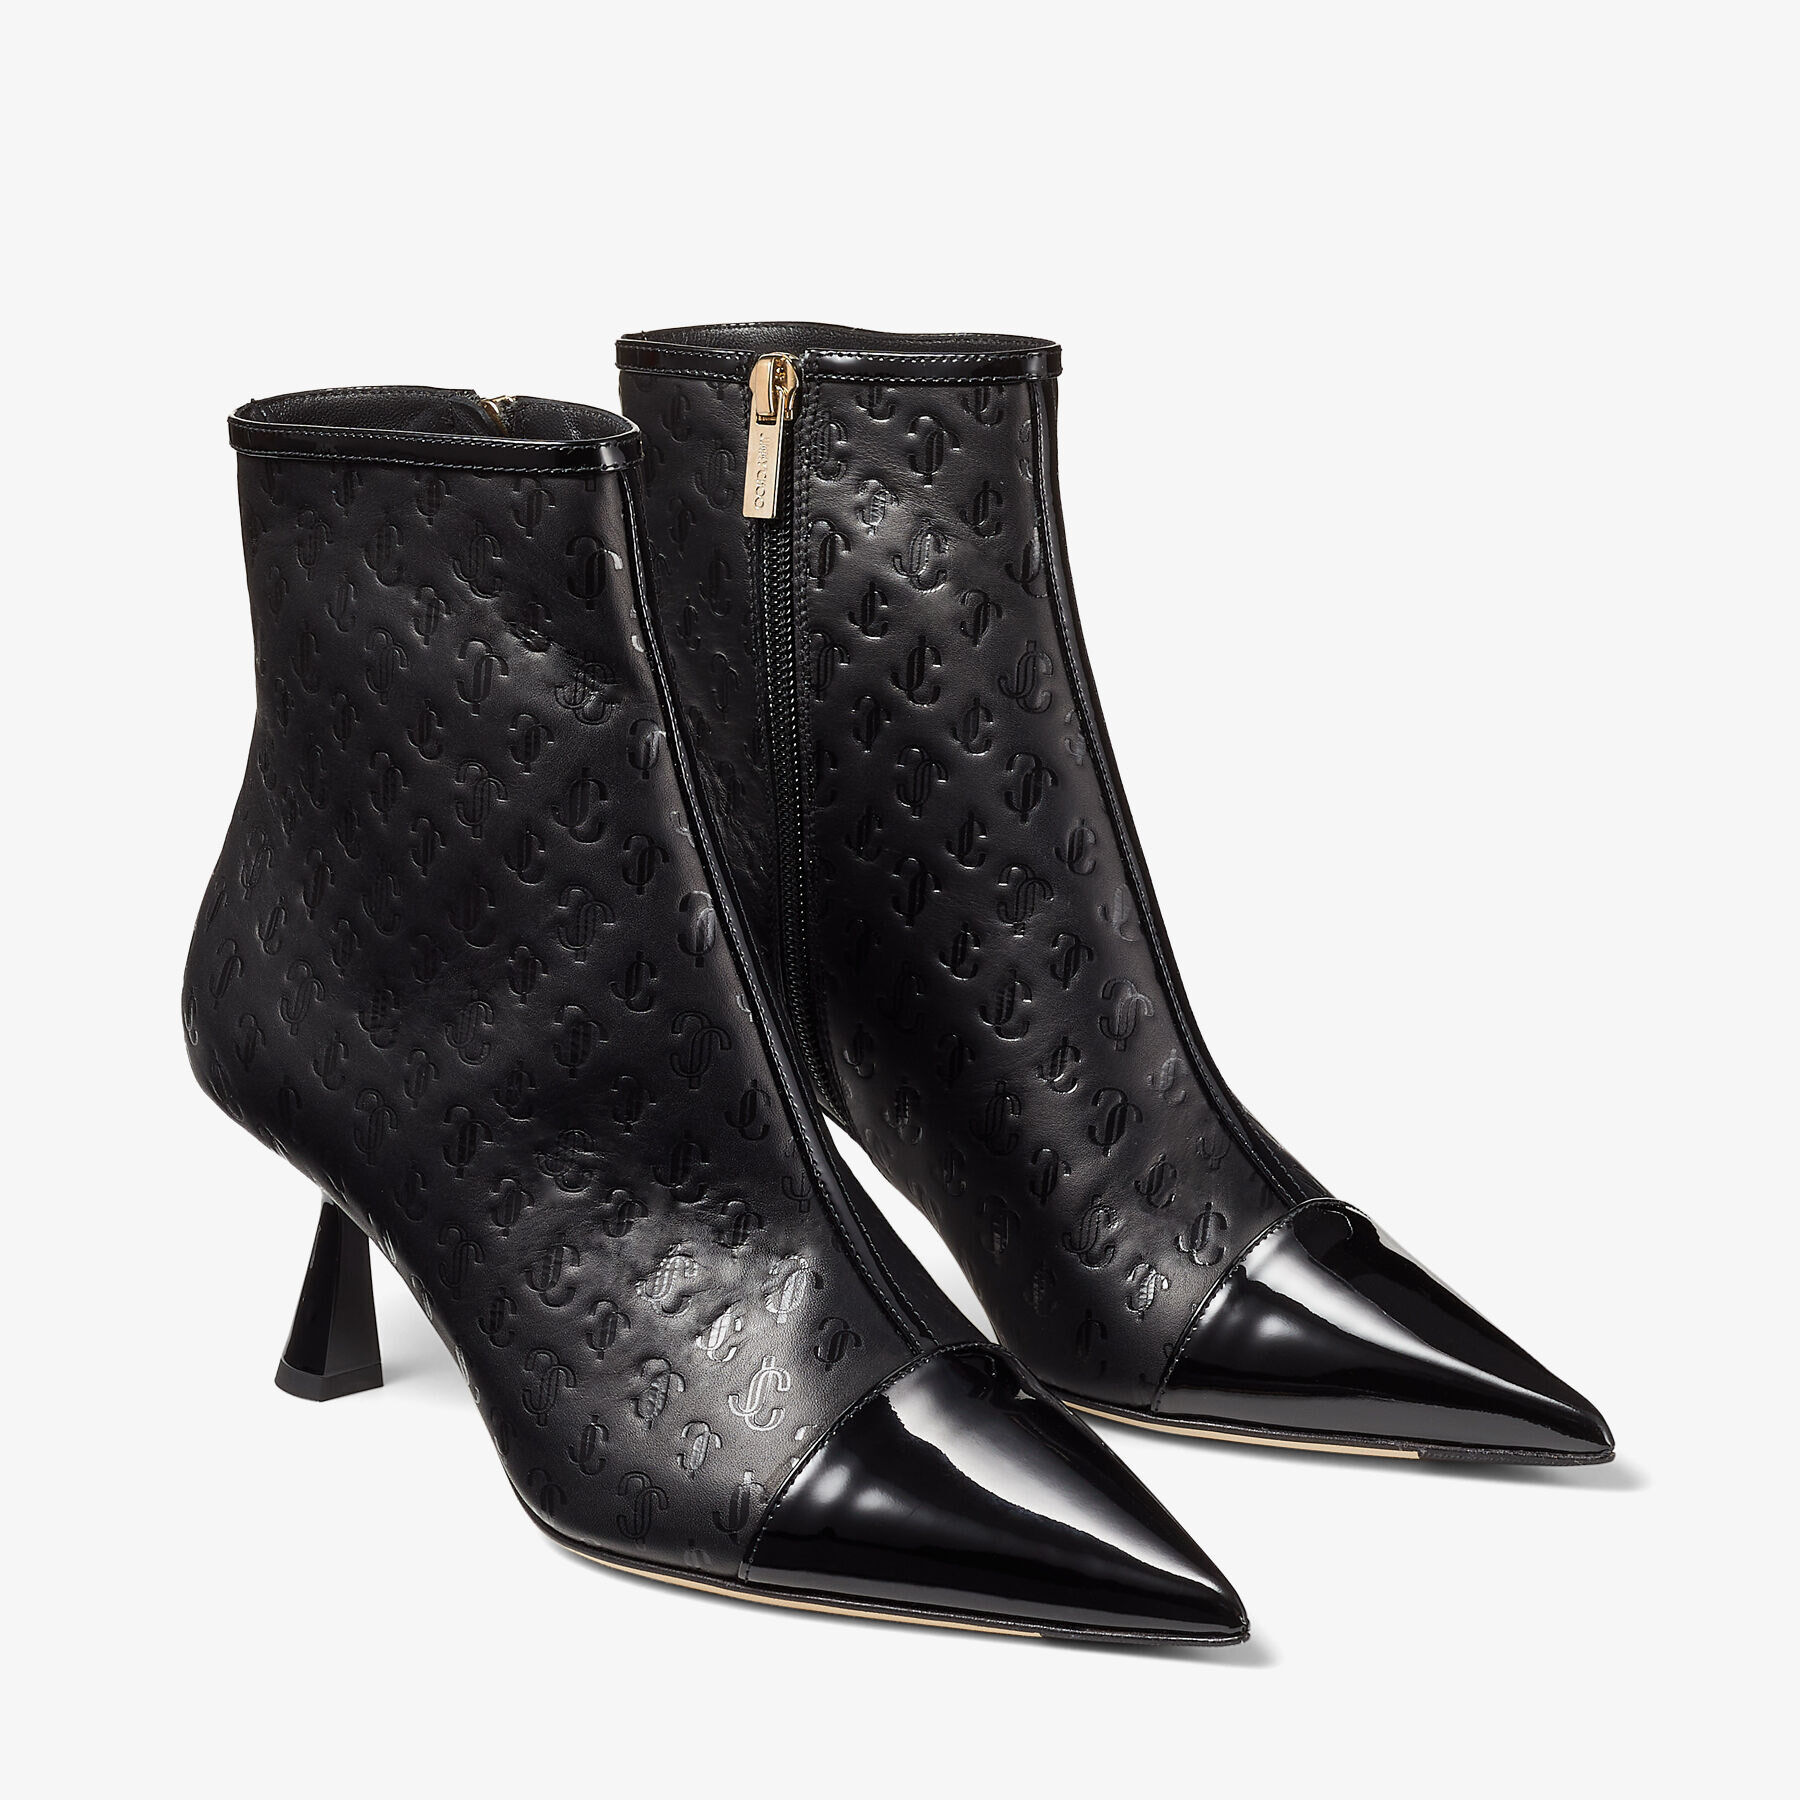 Black Patent and JC Monogram Leather Ankle Boots | KIX/Z 65 